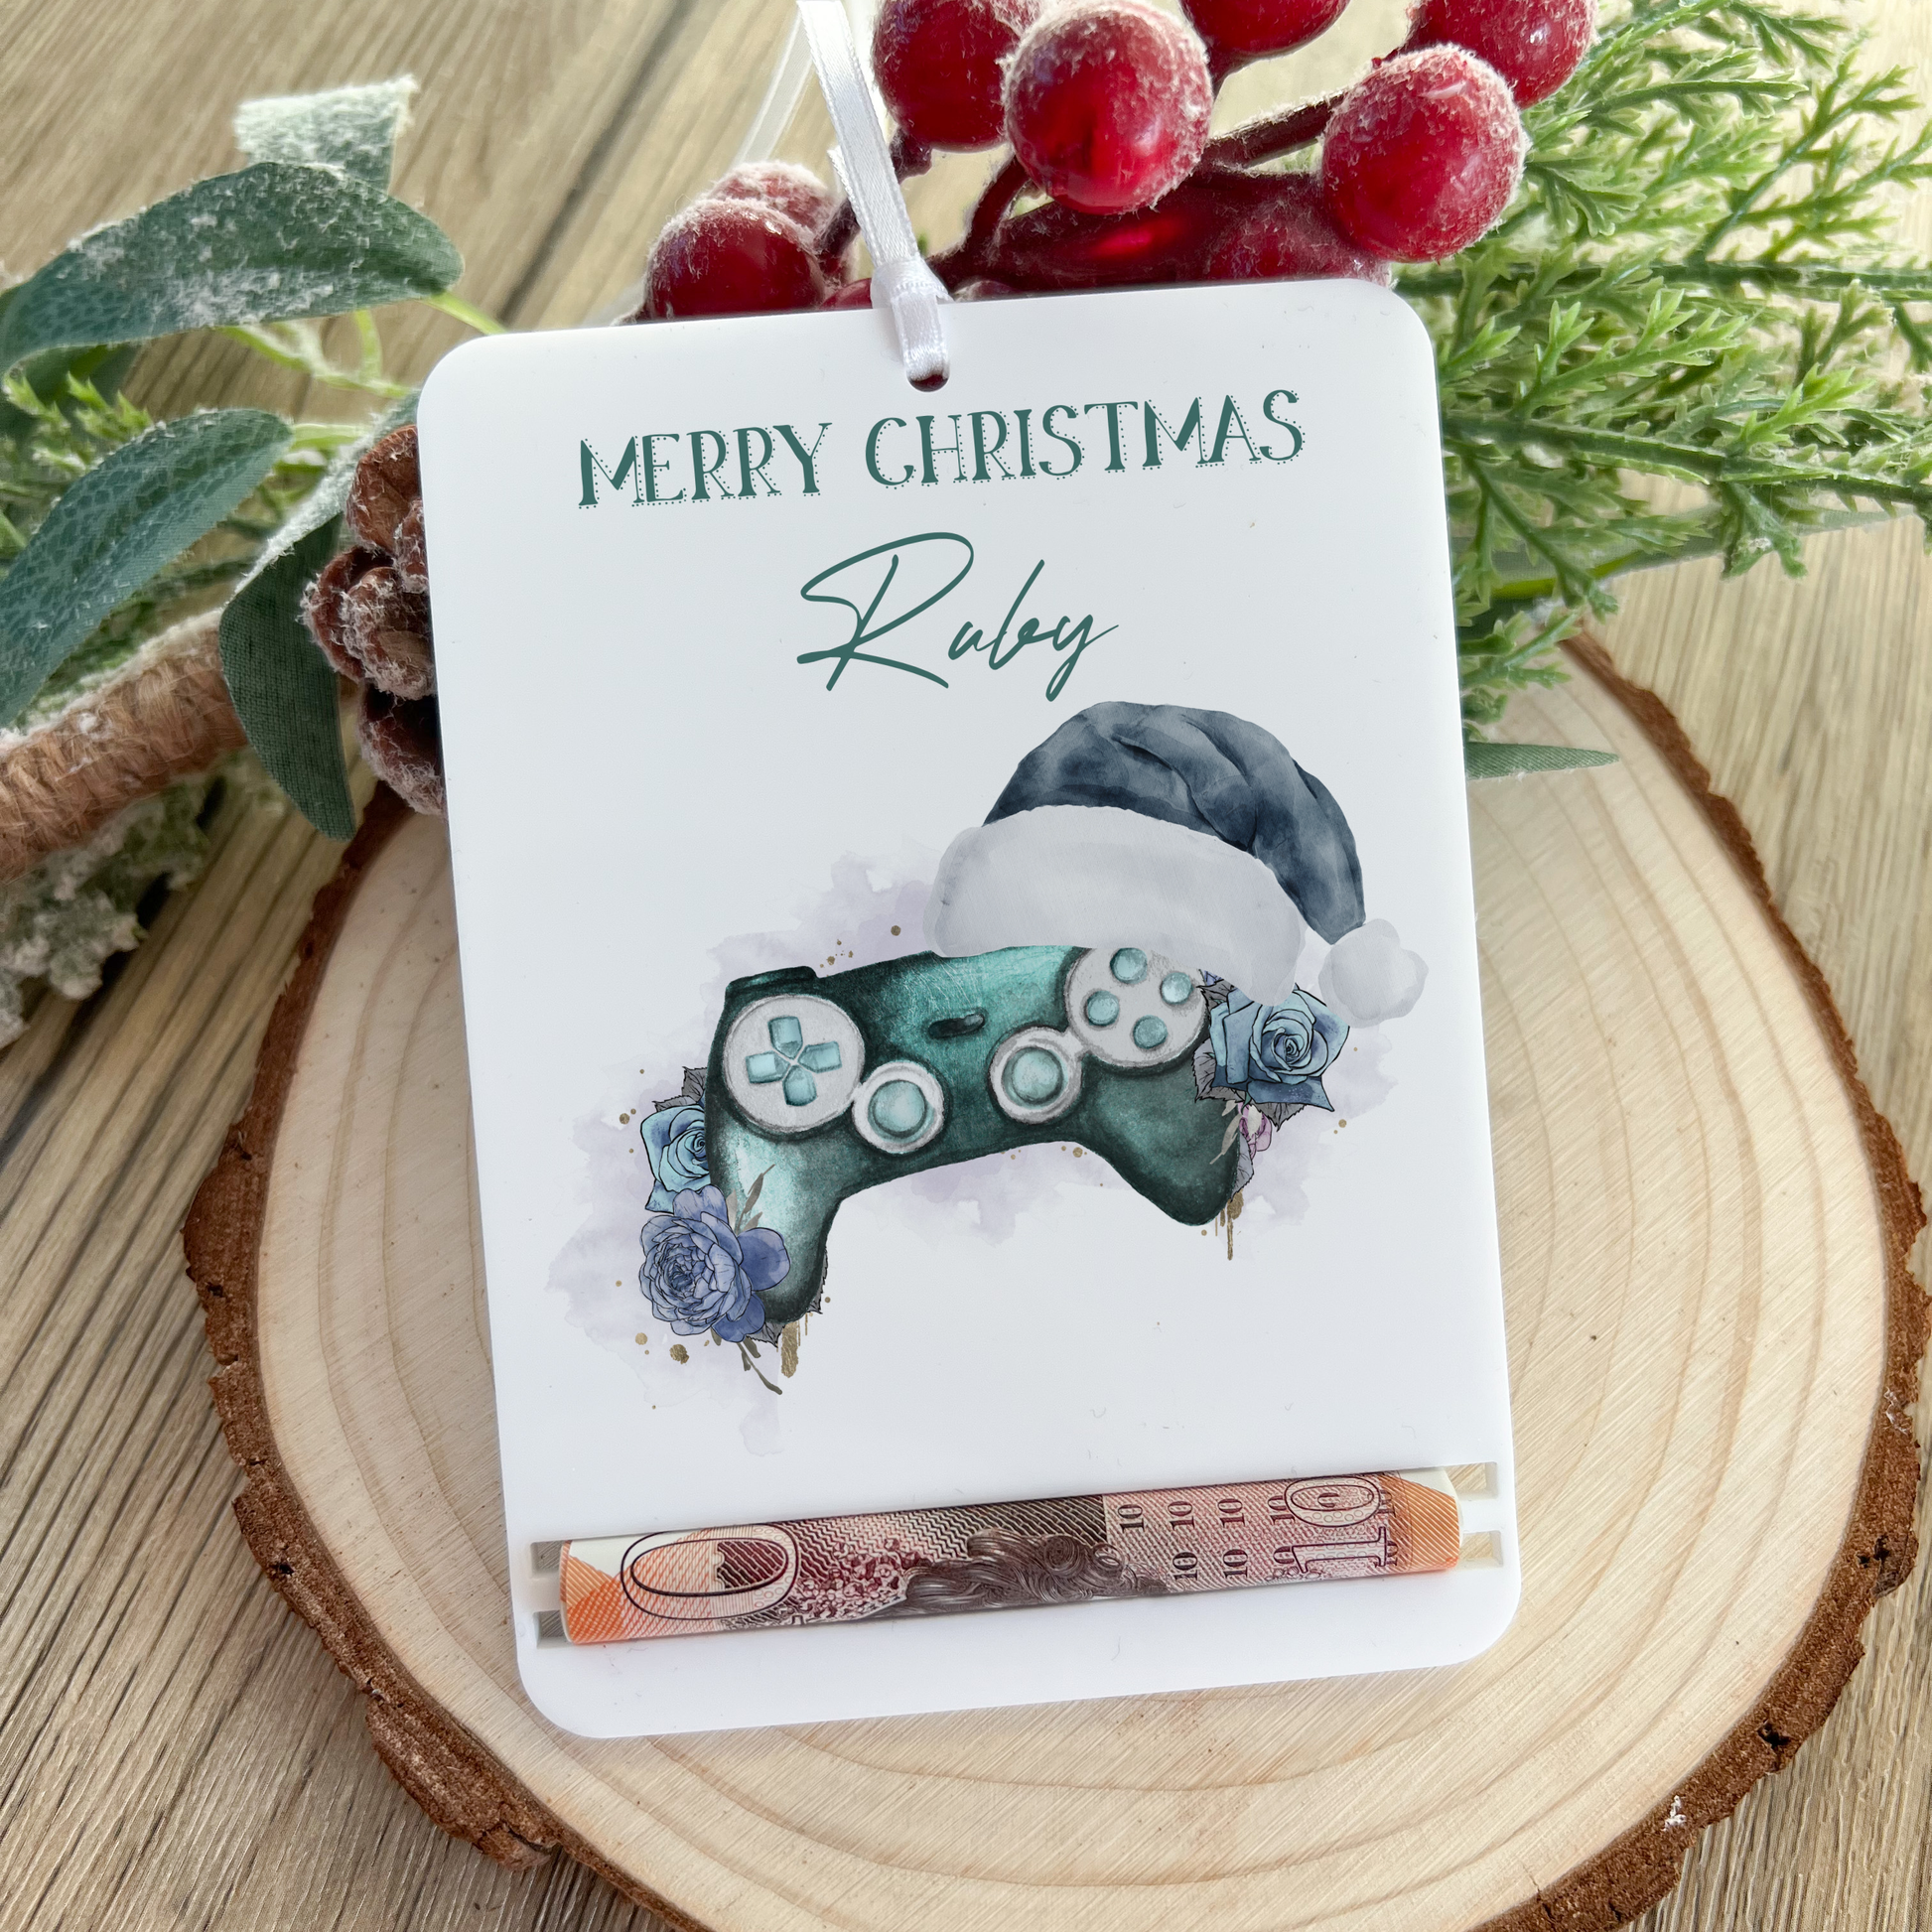 acrylic money holder with teal gaming design for Christmas